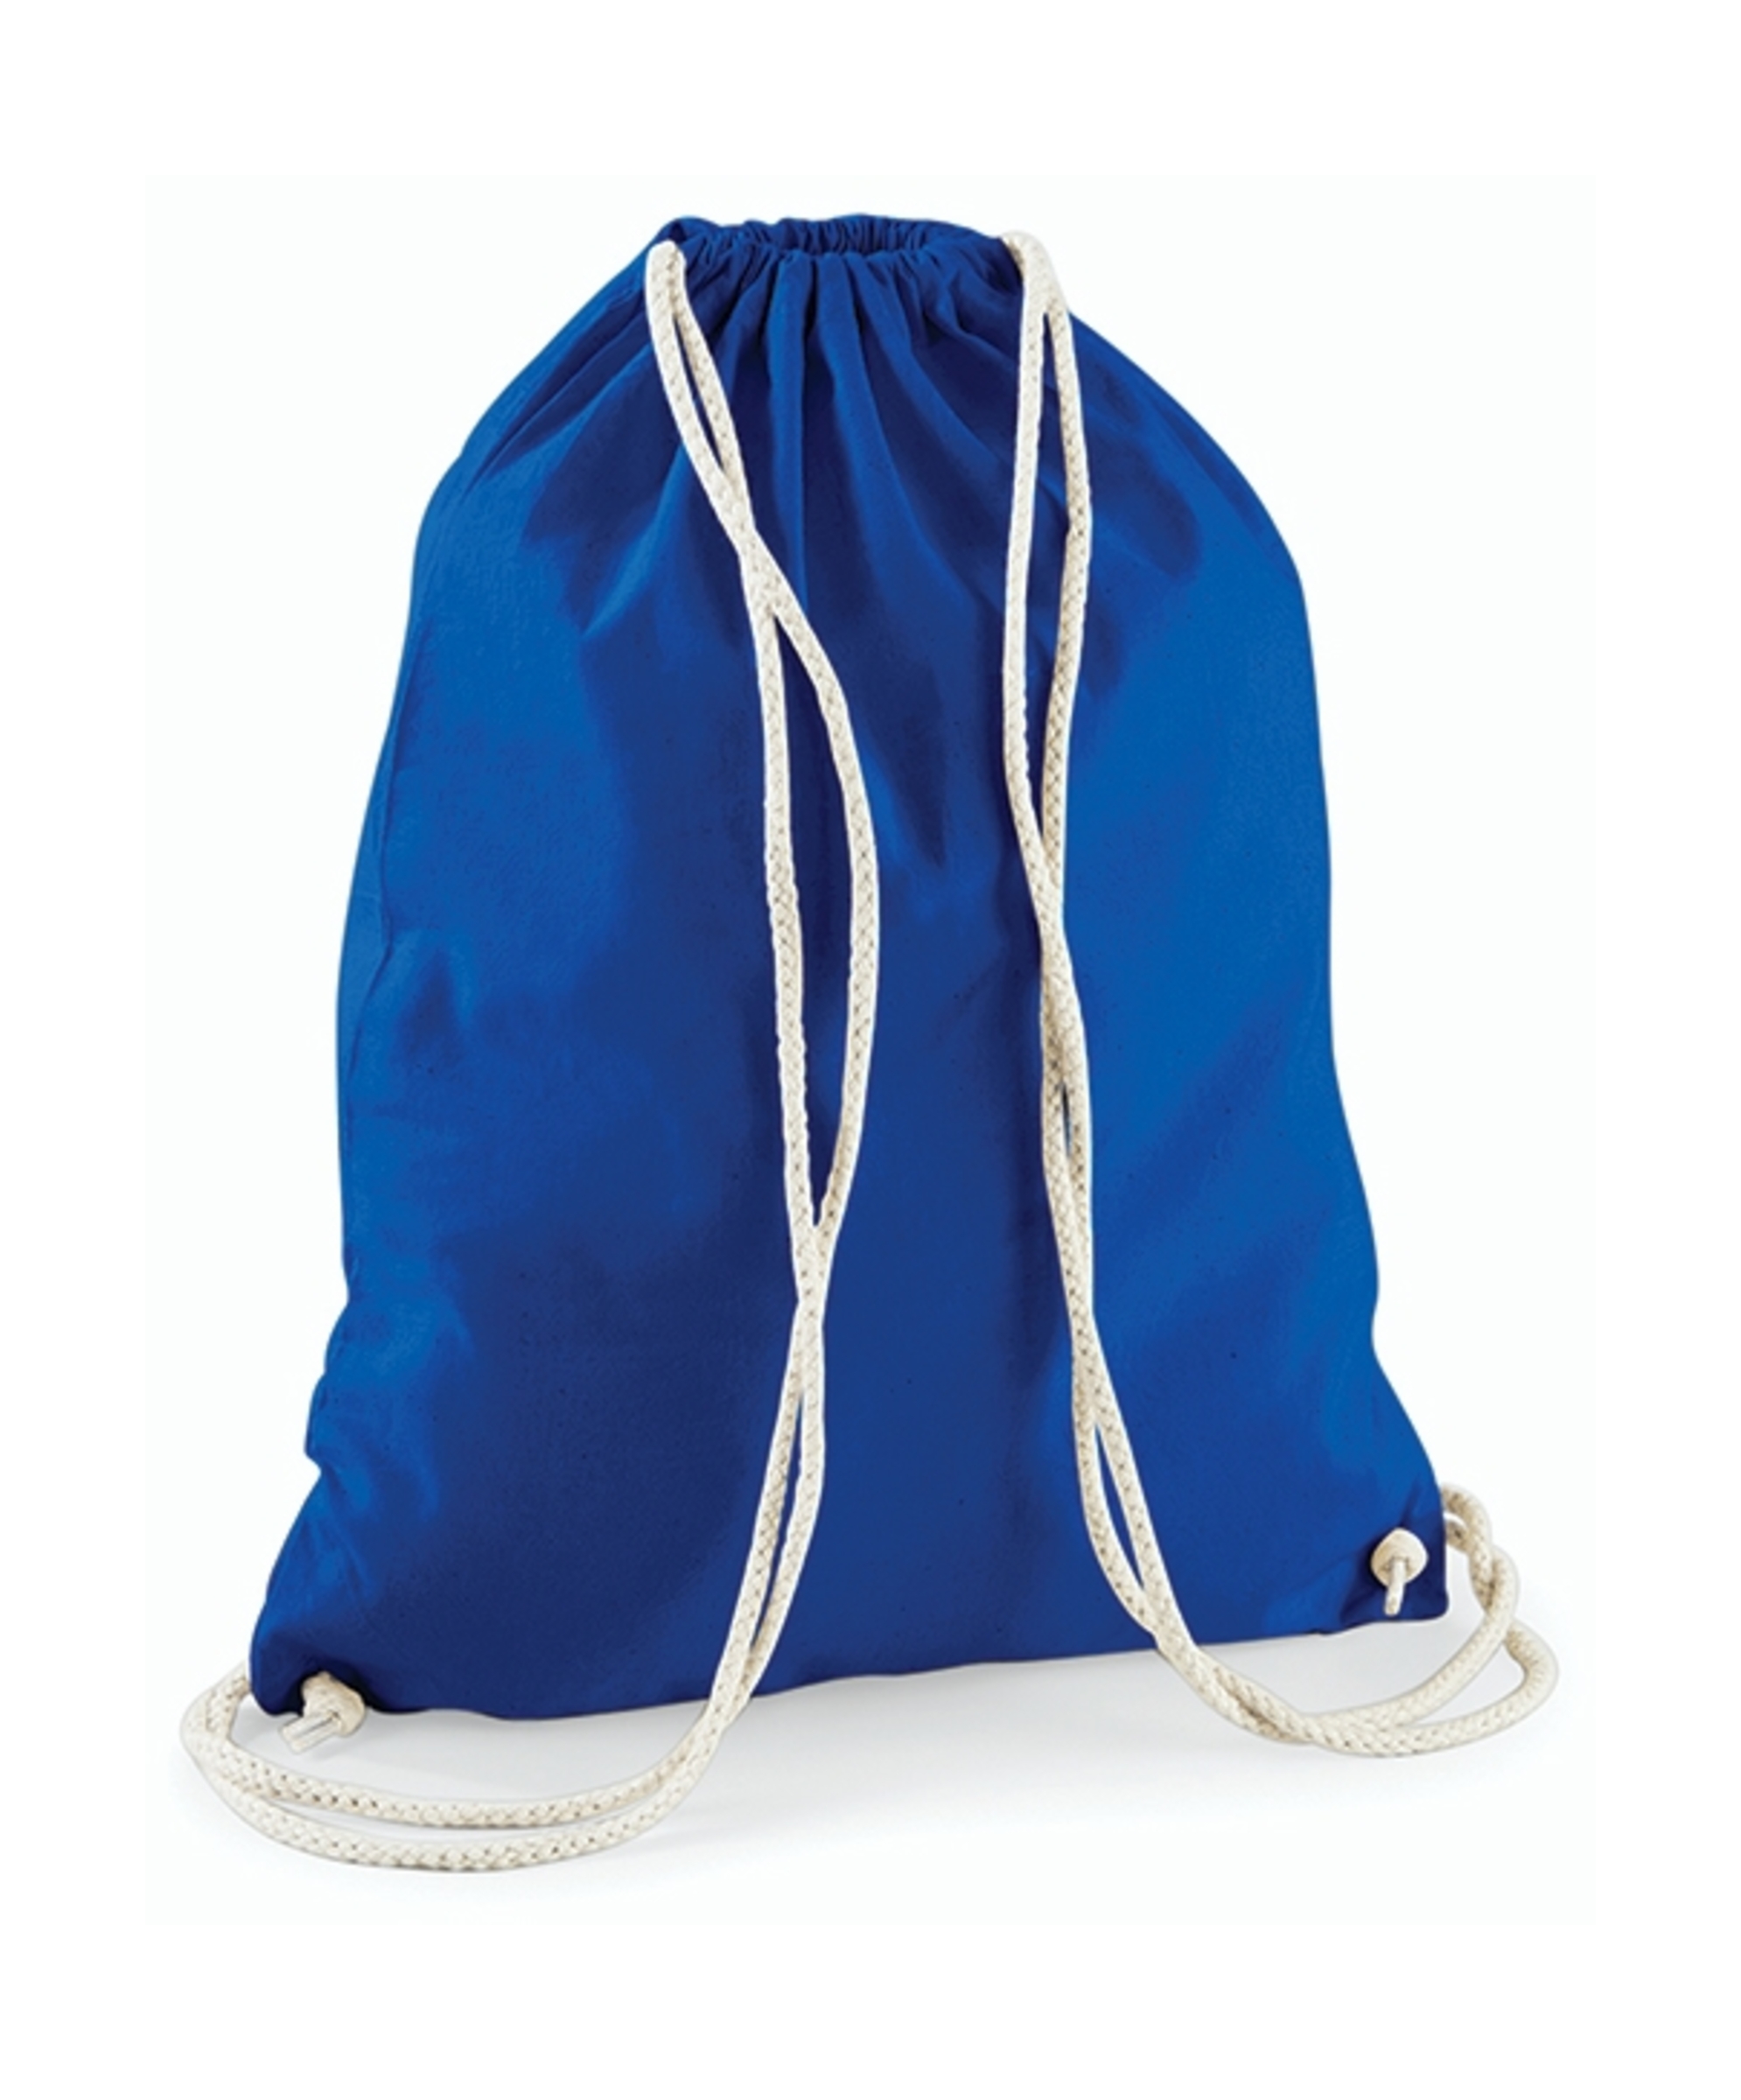 Westford Mill Cotton Gymsack - Bright Royal - One Size